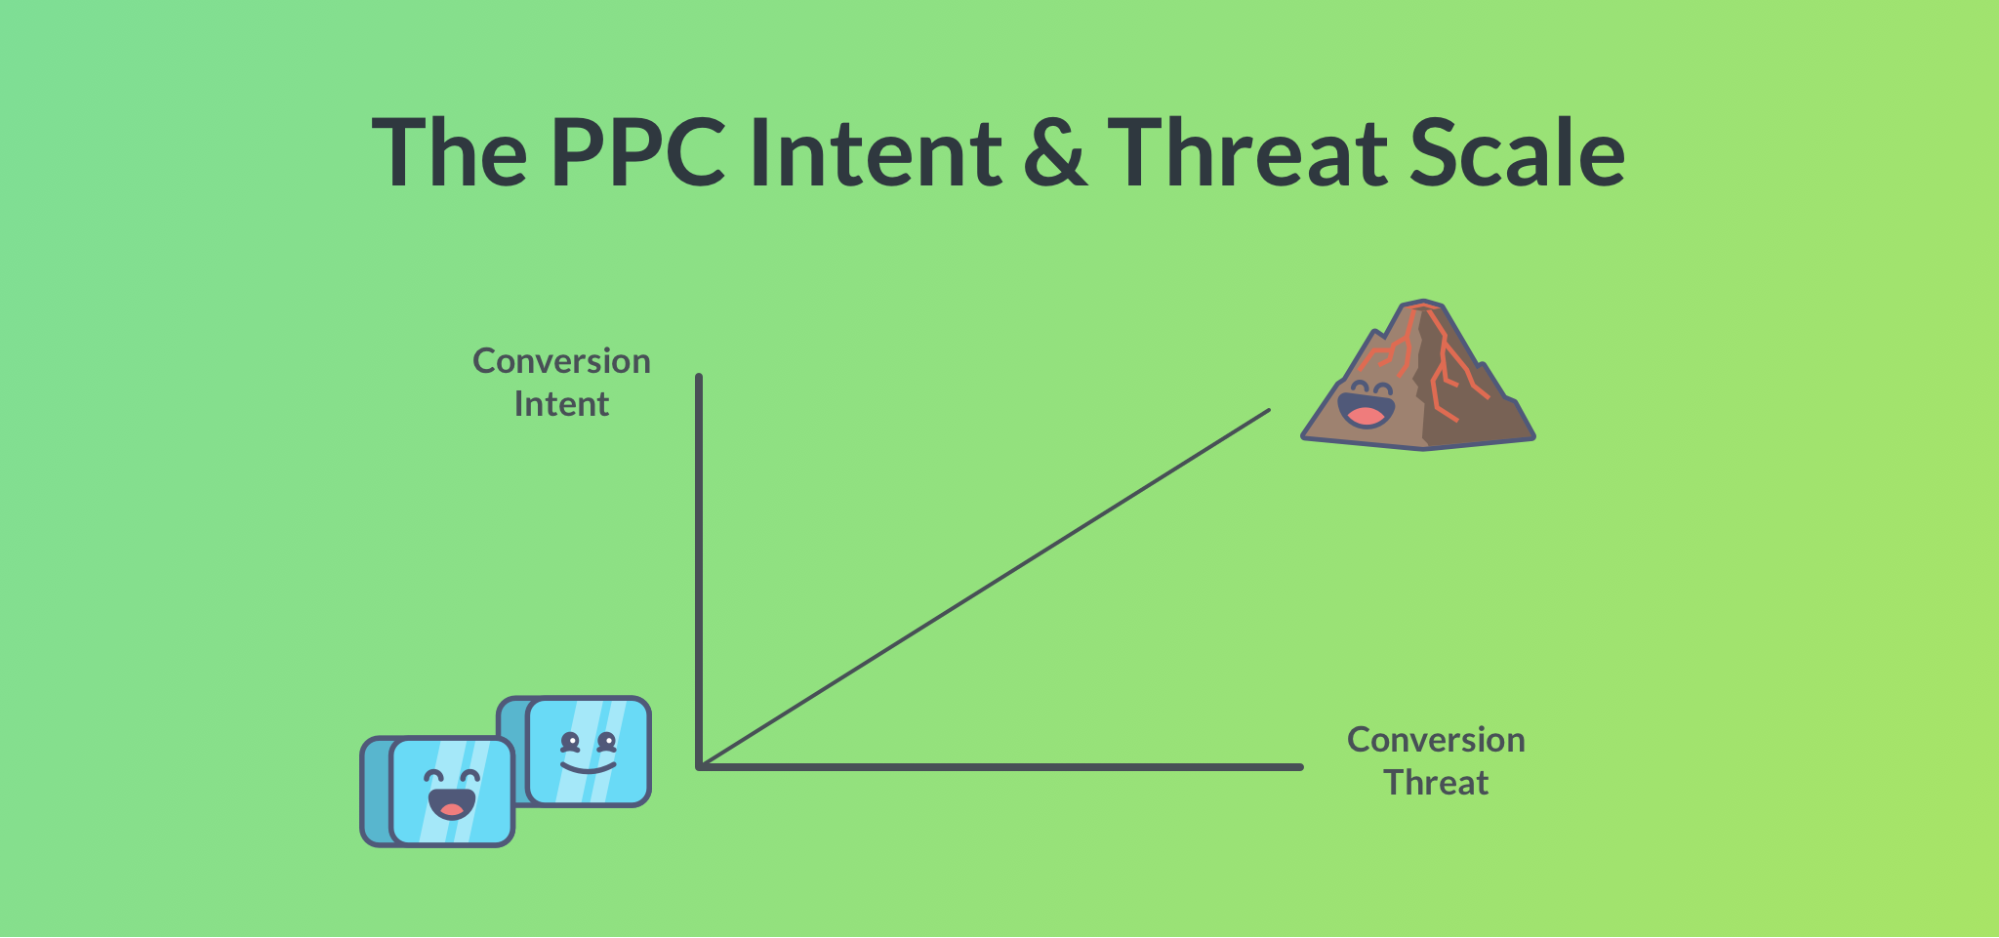 Graph showing PPC intent/threat